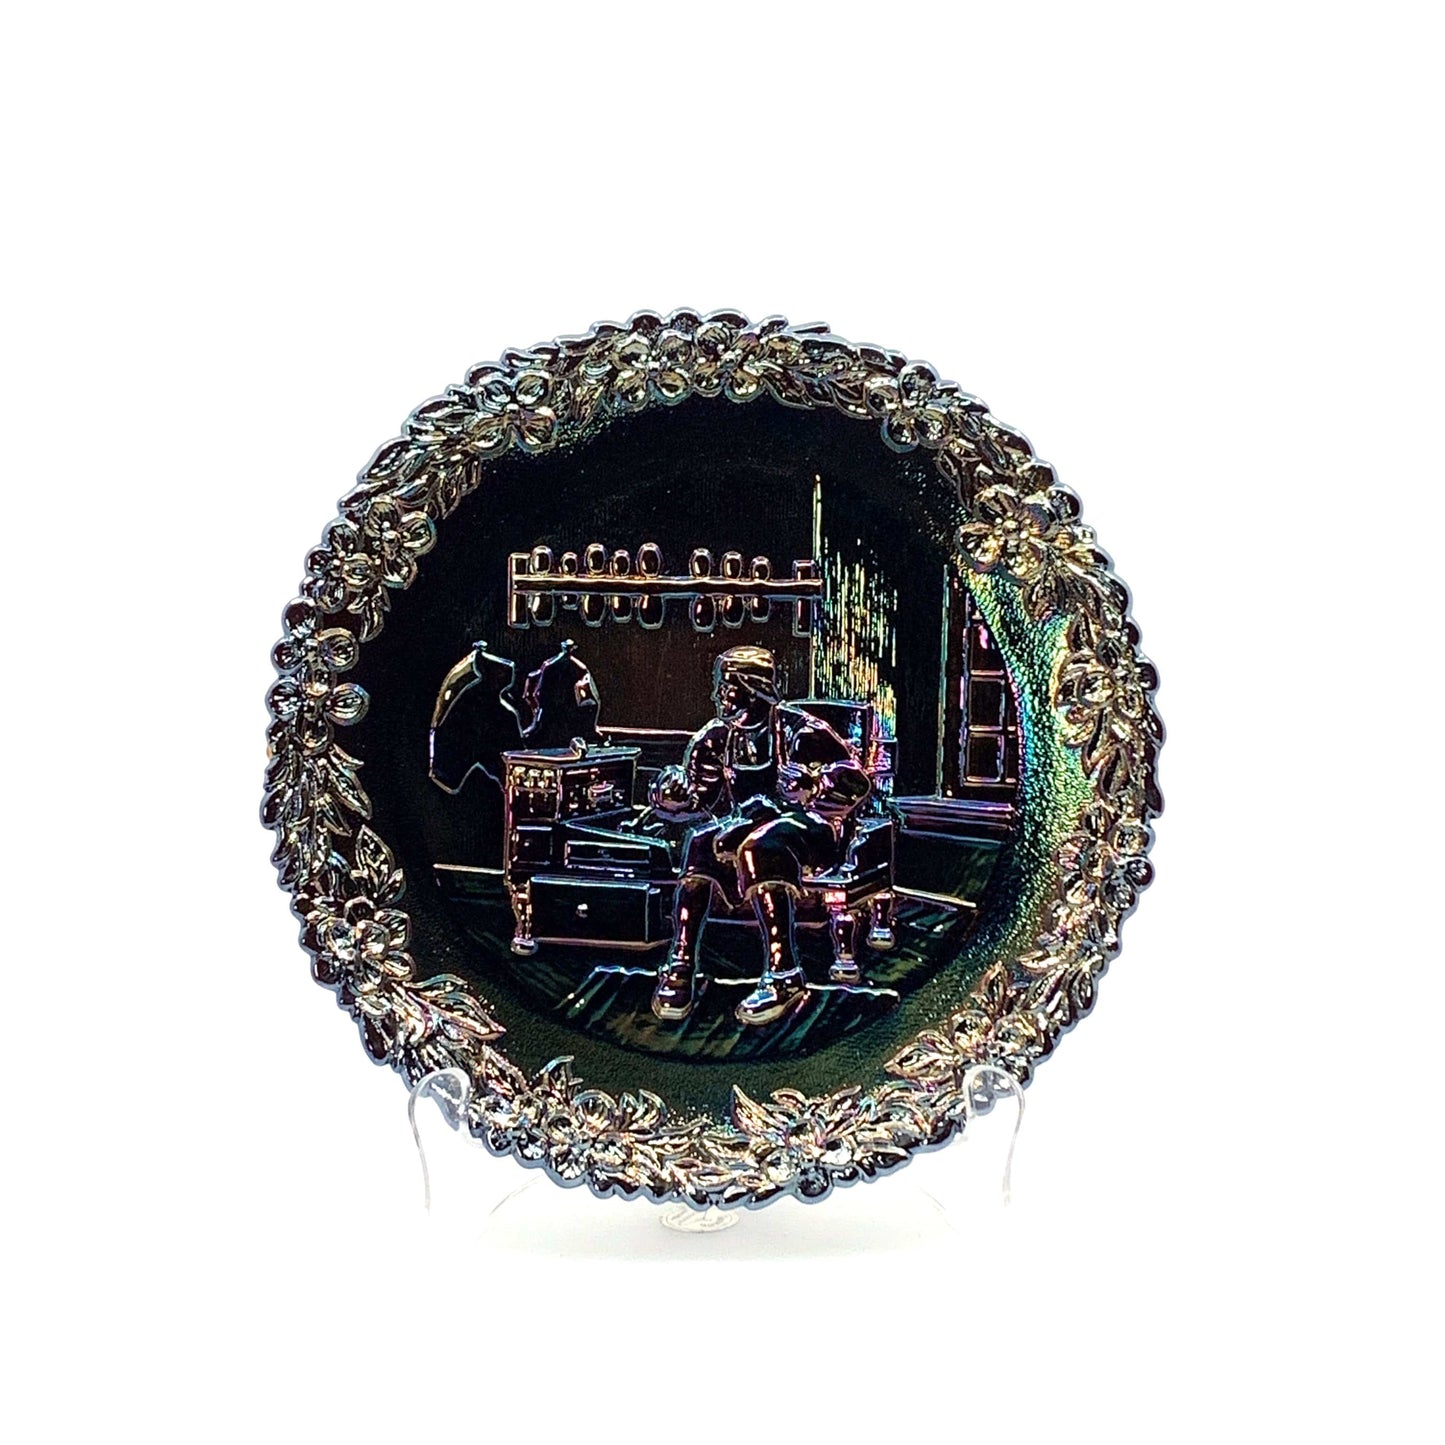 1973 Fenton Glass Collector Plate No. 4 In The Annual Series Early Craftsman of English America